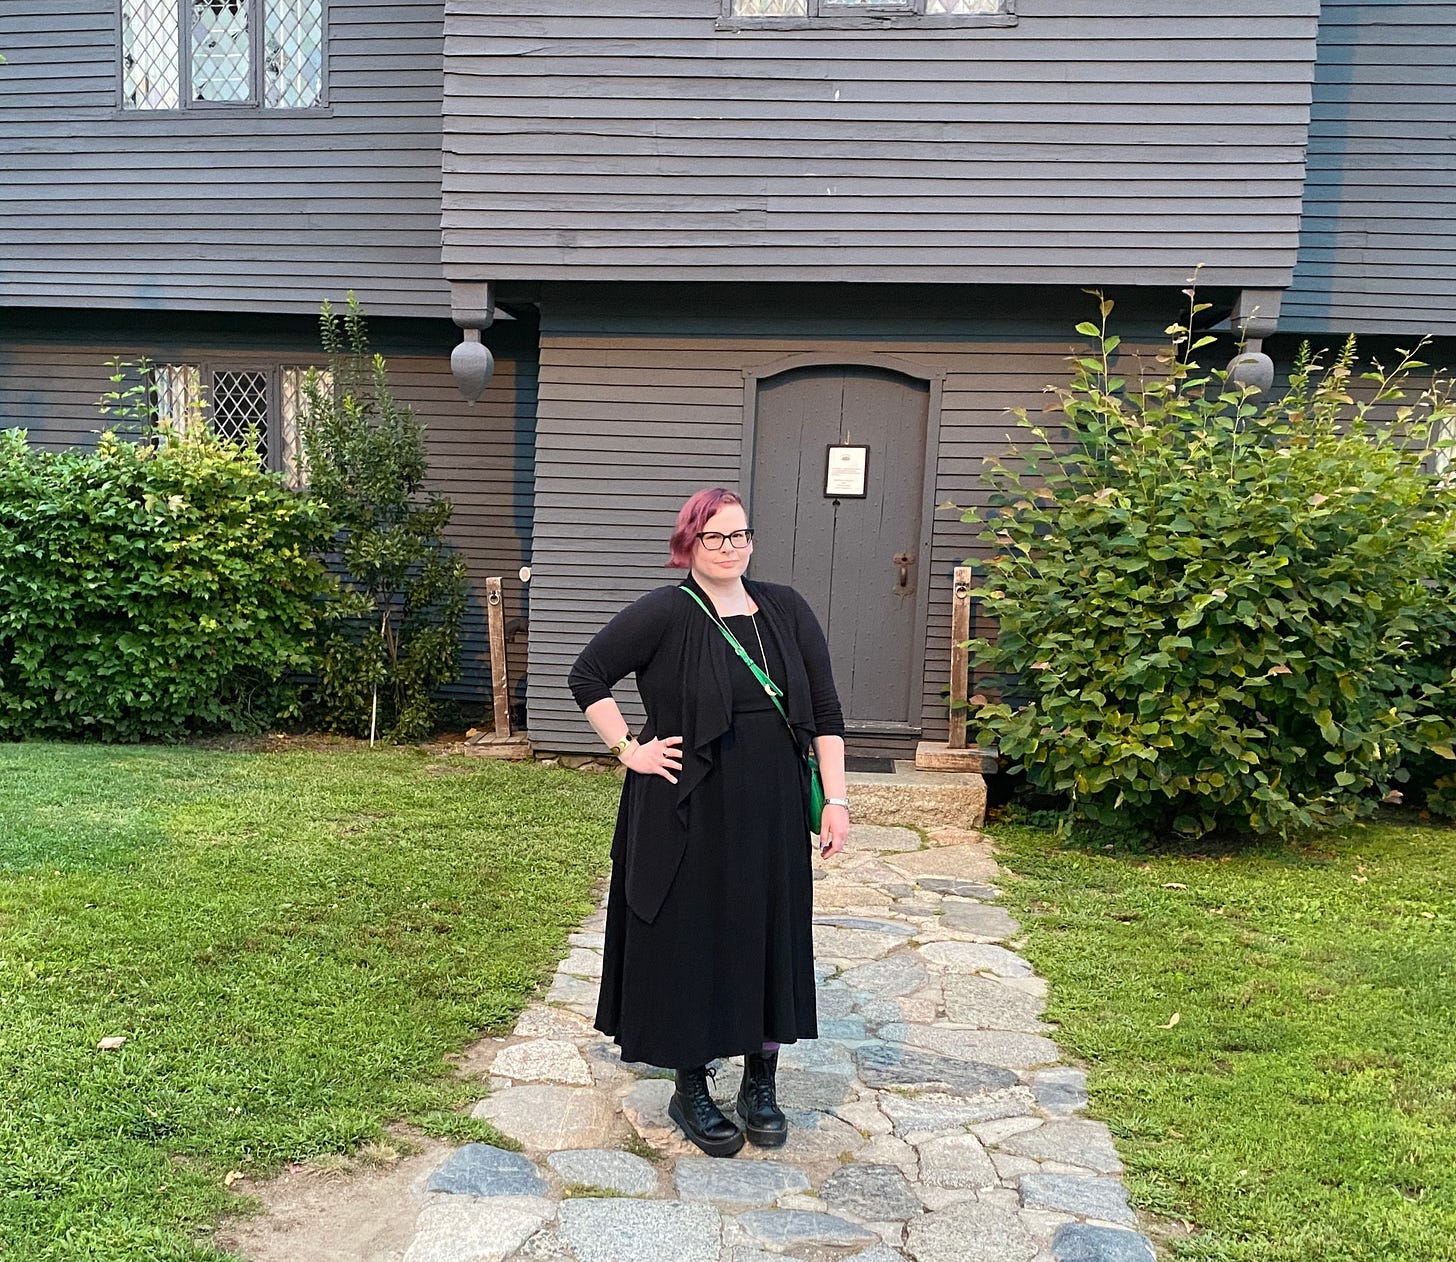 A photo of me standing outside the "Witch House" in Salem